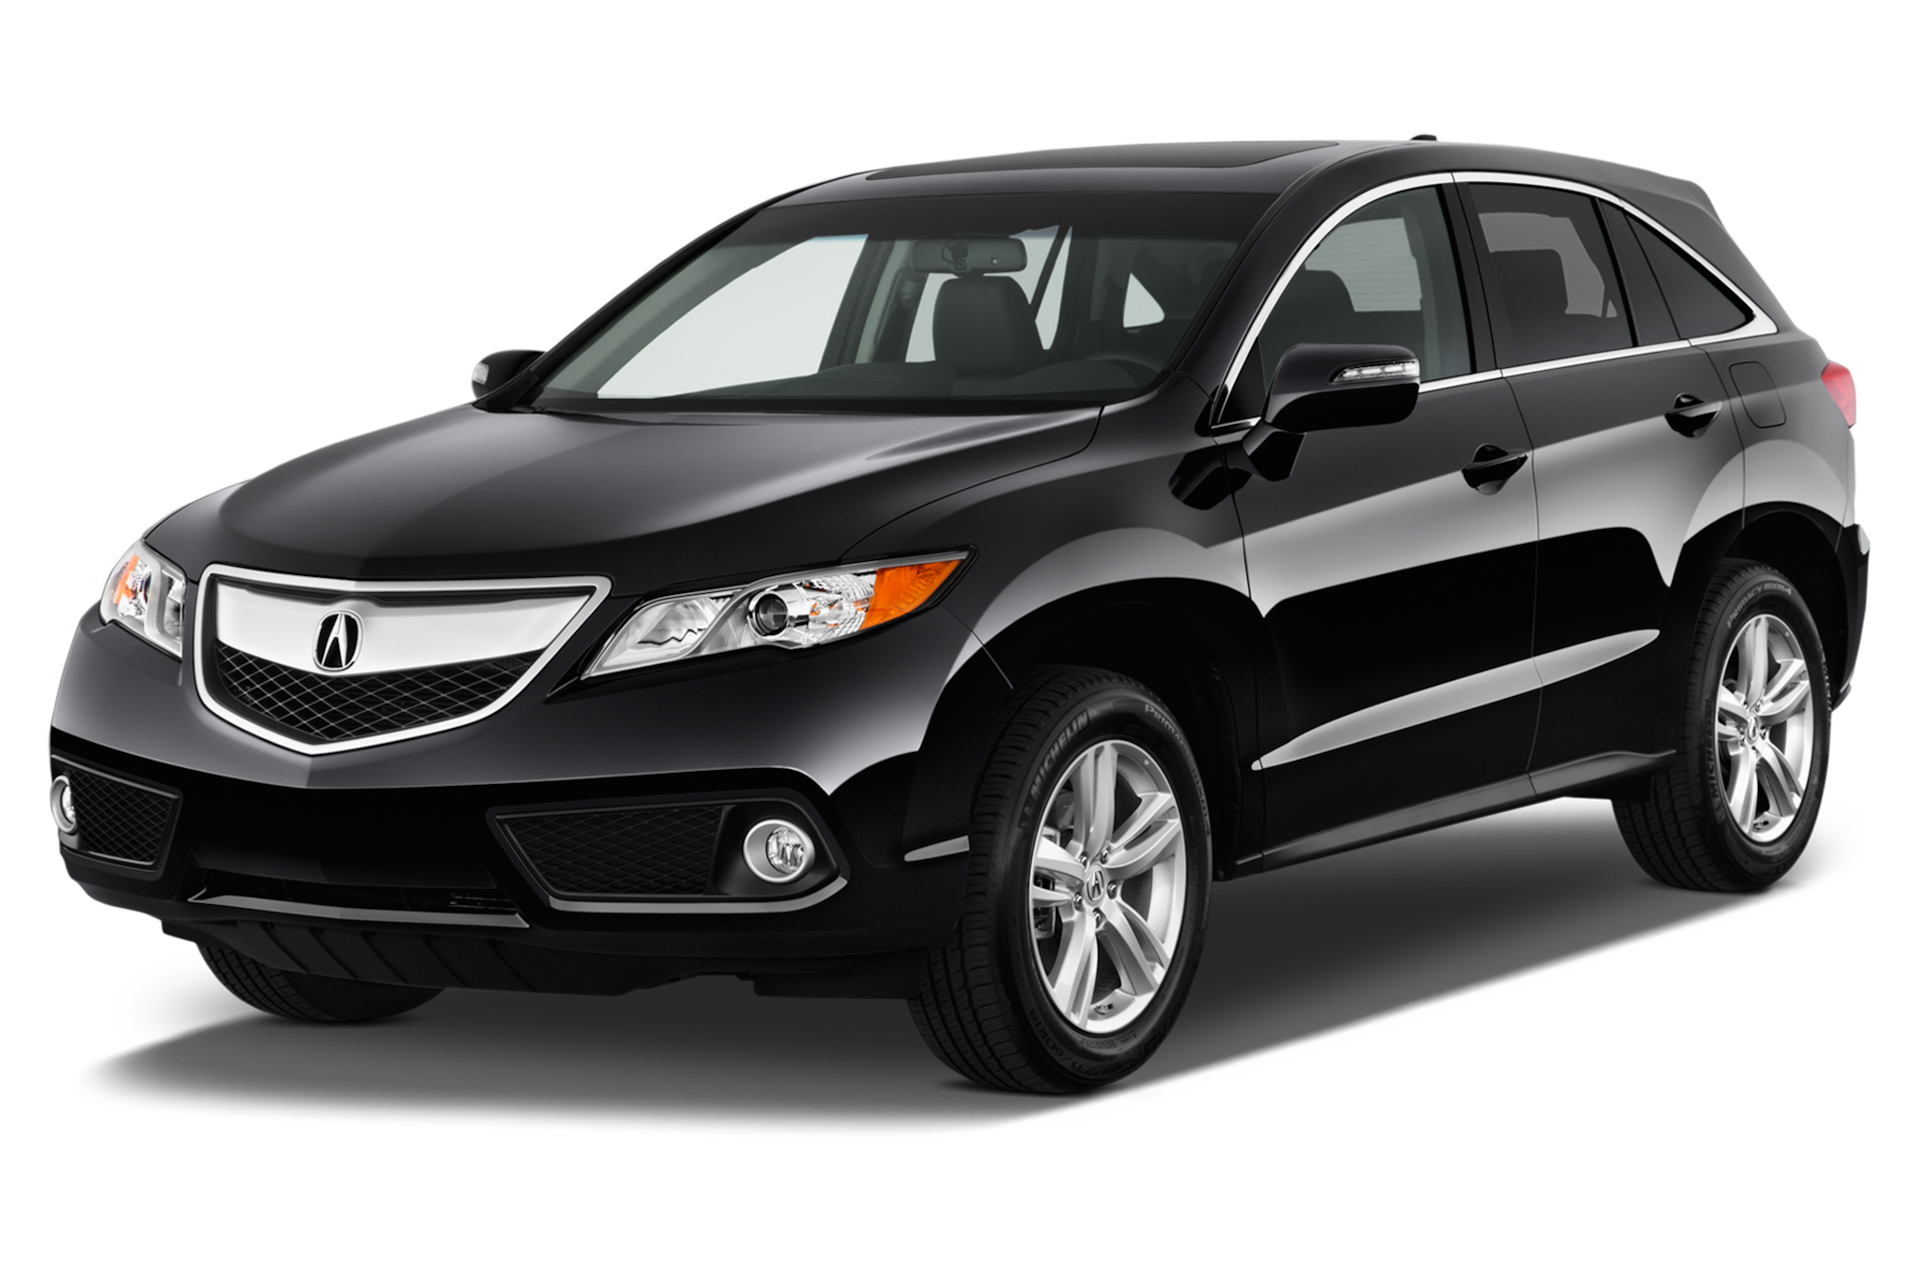 2013 Acura RDX Prices, Reviews, and Photos - MotorTrend